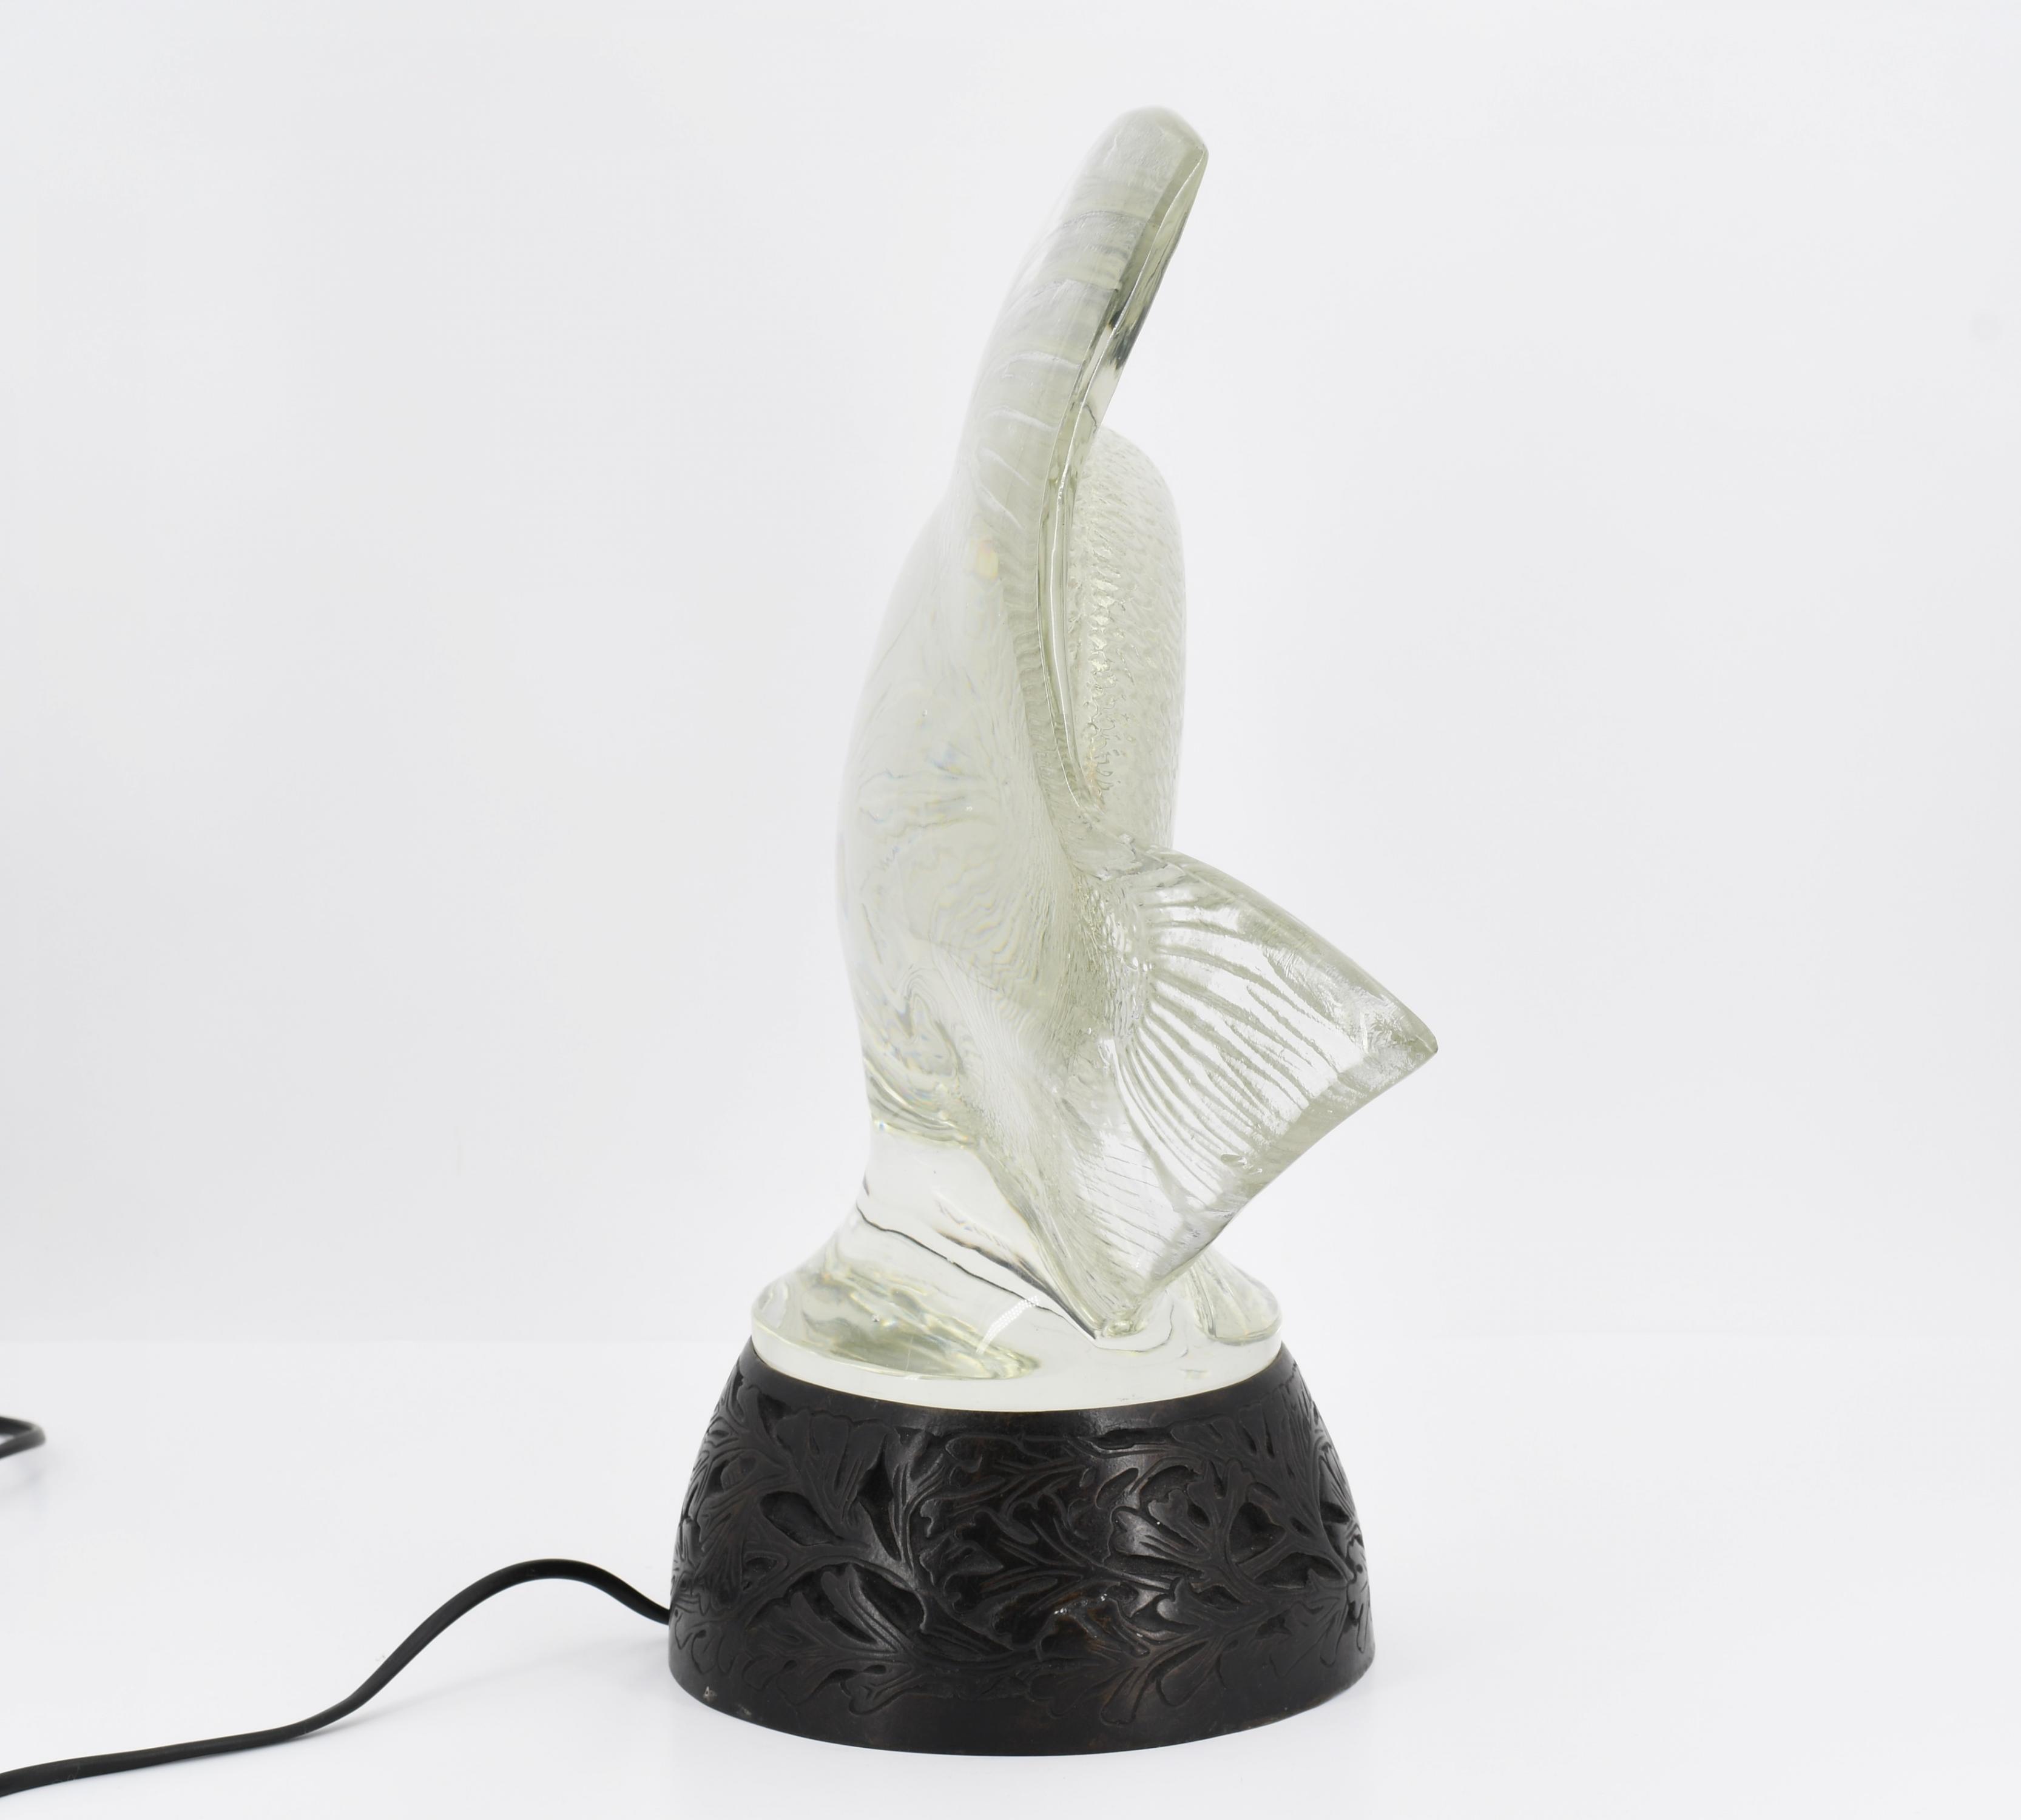 Table lamp "Gros Poisson, Vagues" - Image 5 of 6